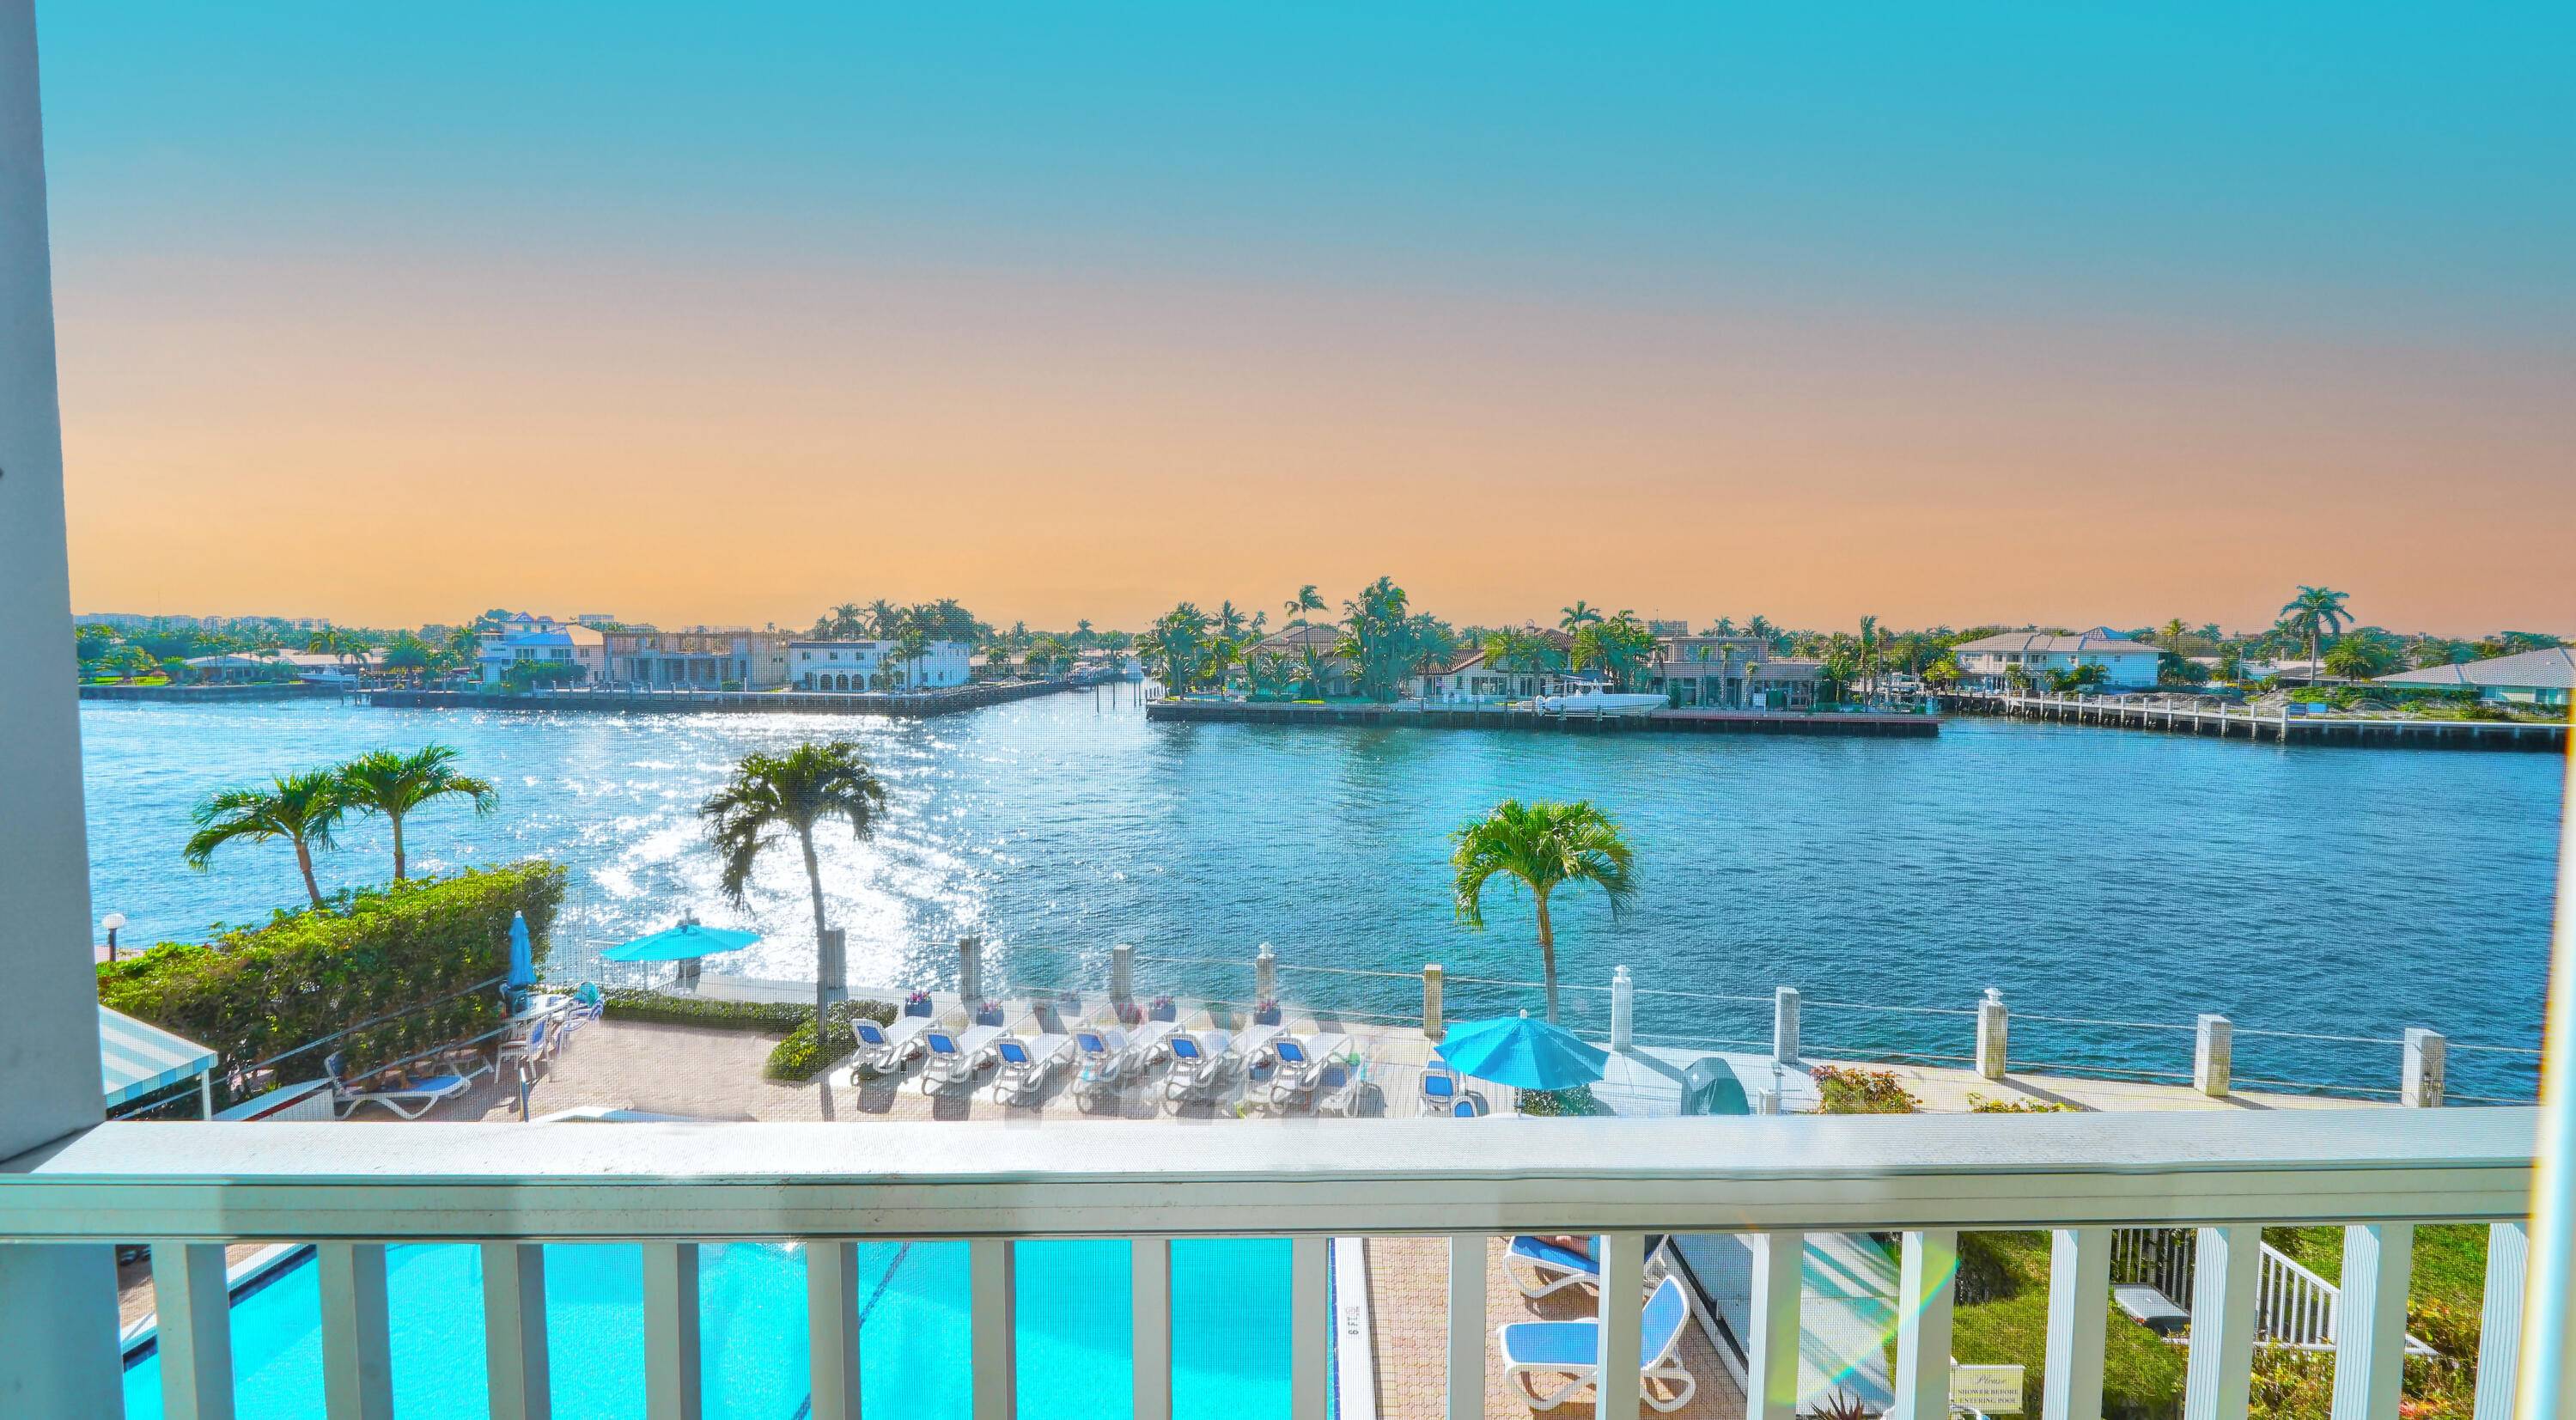 Enjoy serene direct Intracoastal water views in this no wake zone.